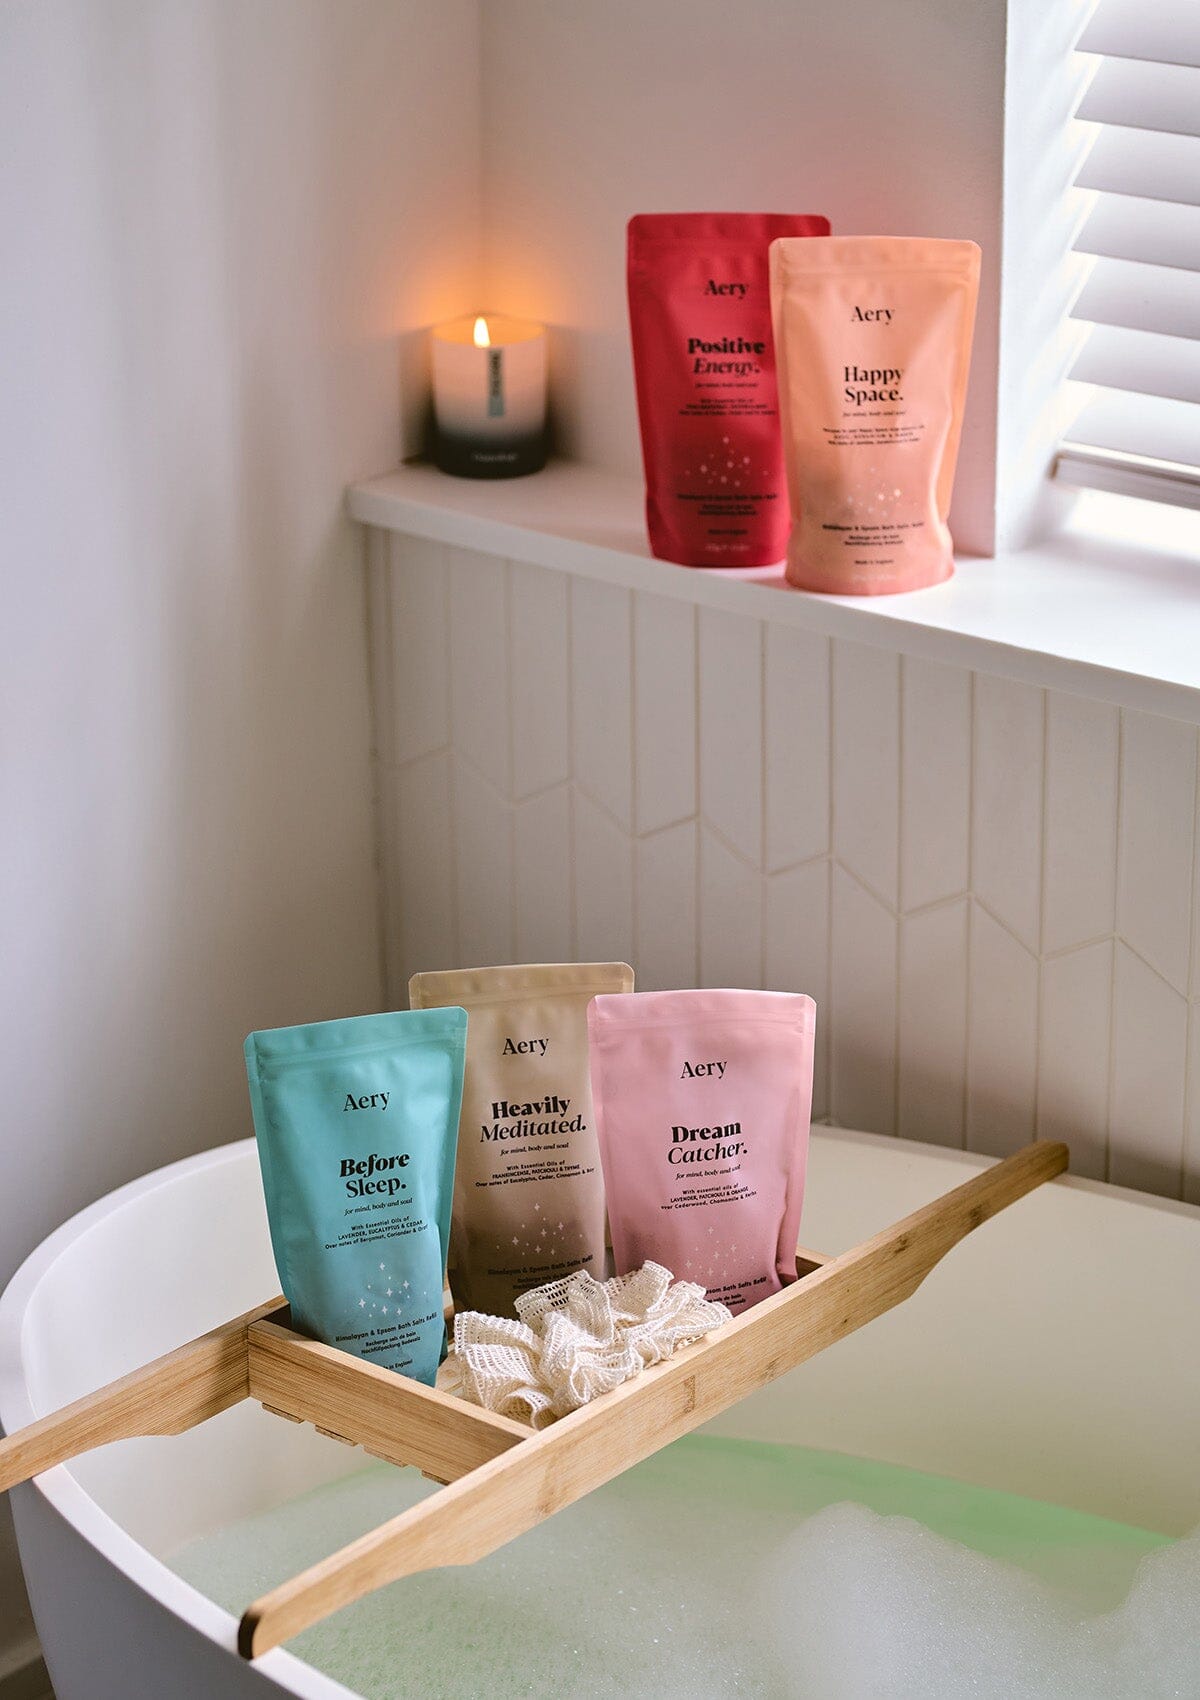 Collection of Aromatherapy bath salt pouches by Aery displayed with before sleep candle in bath room with  bathtub 